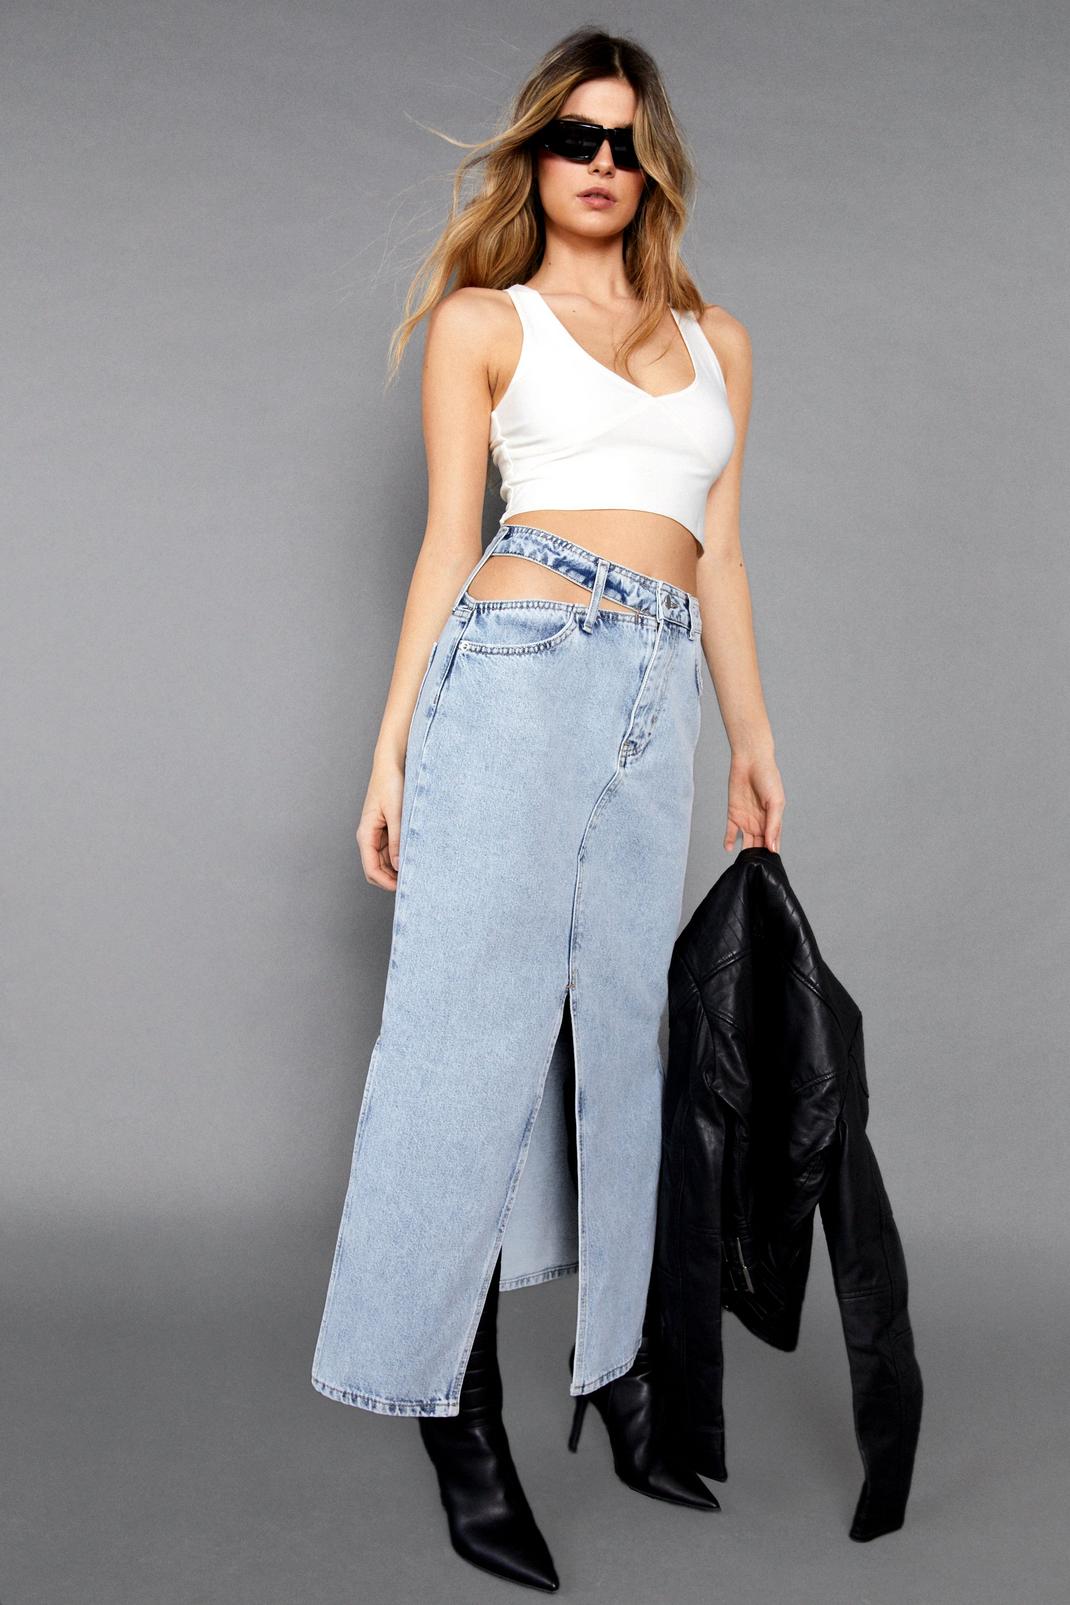 Guys the double waistband + cut out jeans are back in stock on